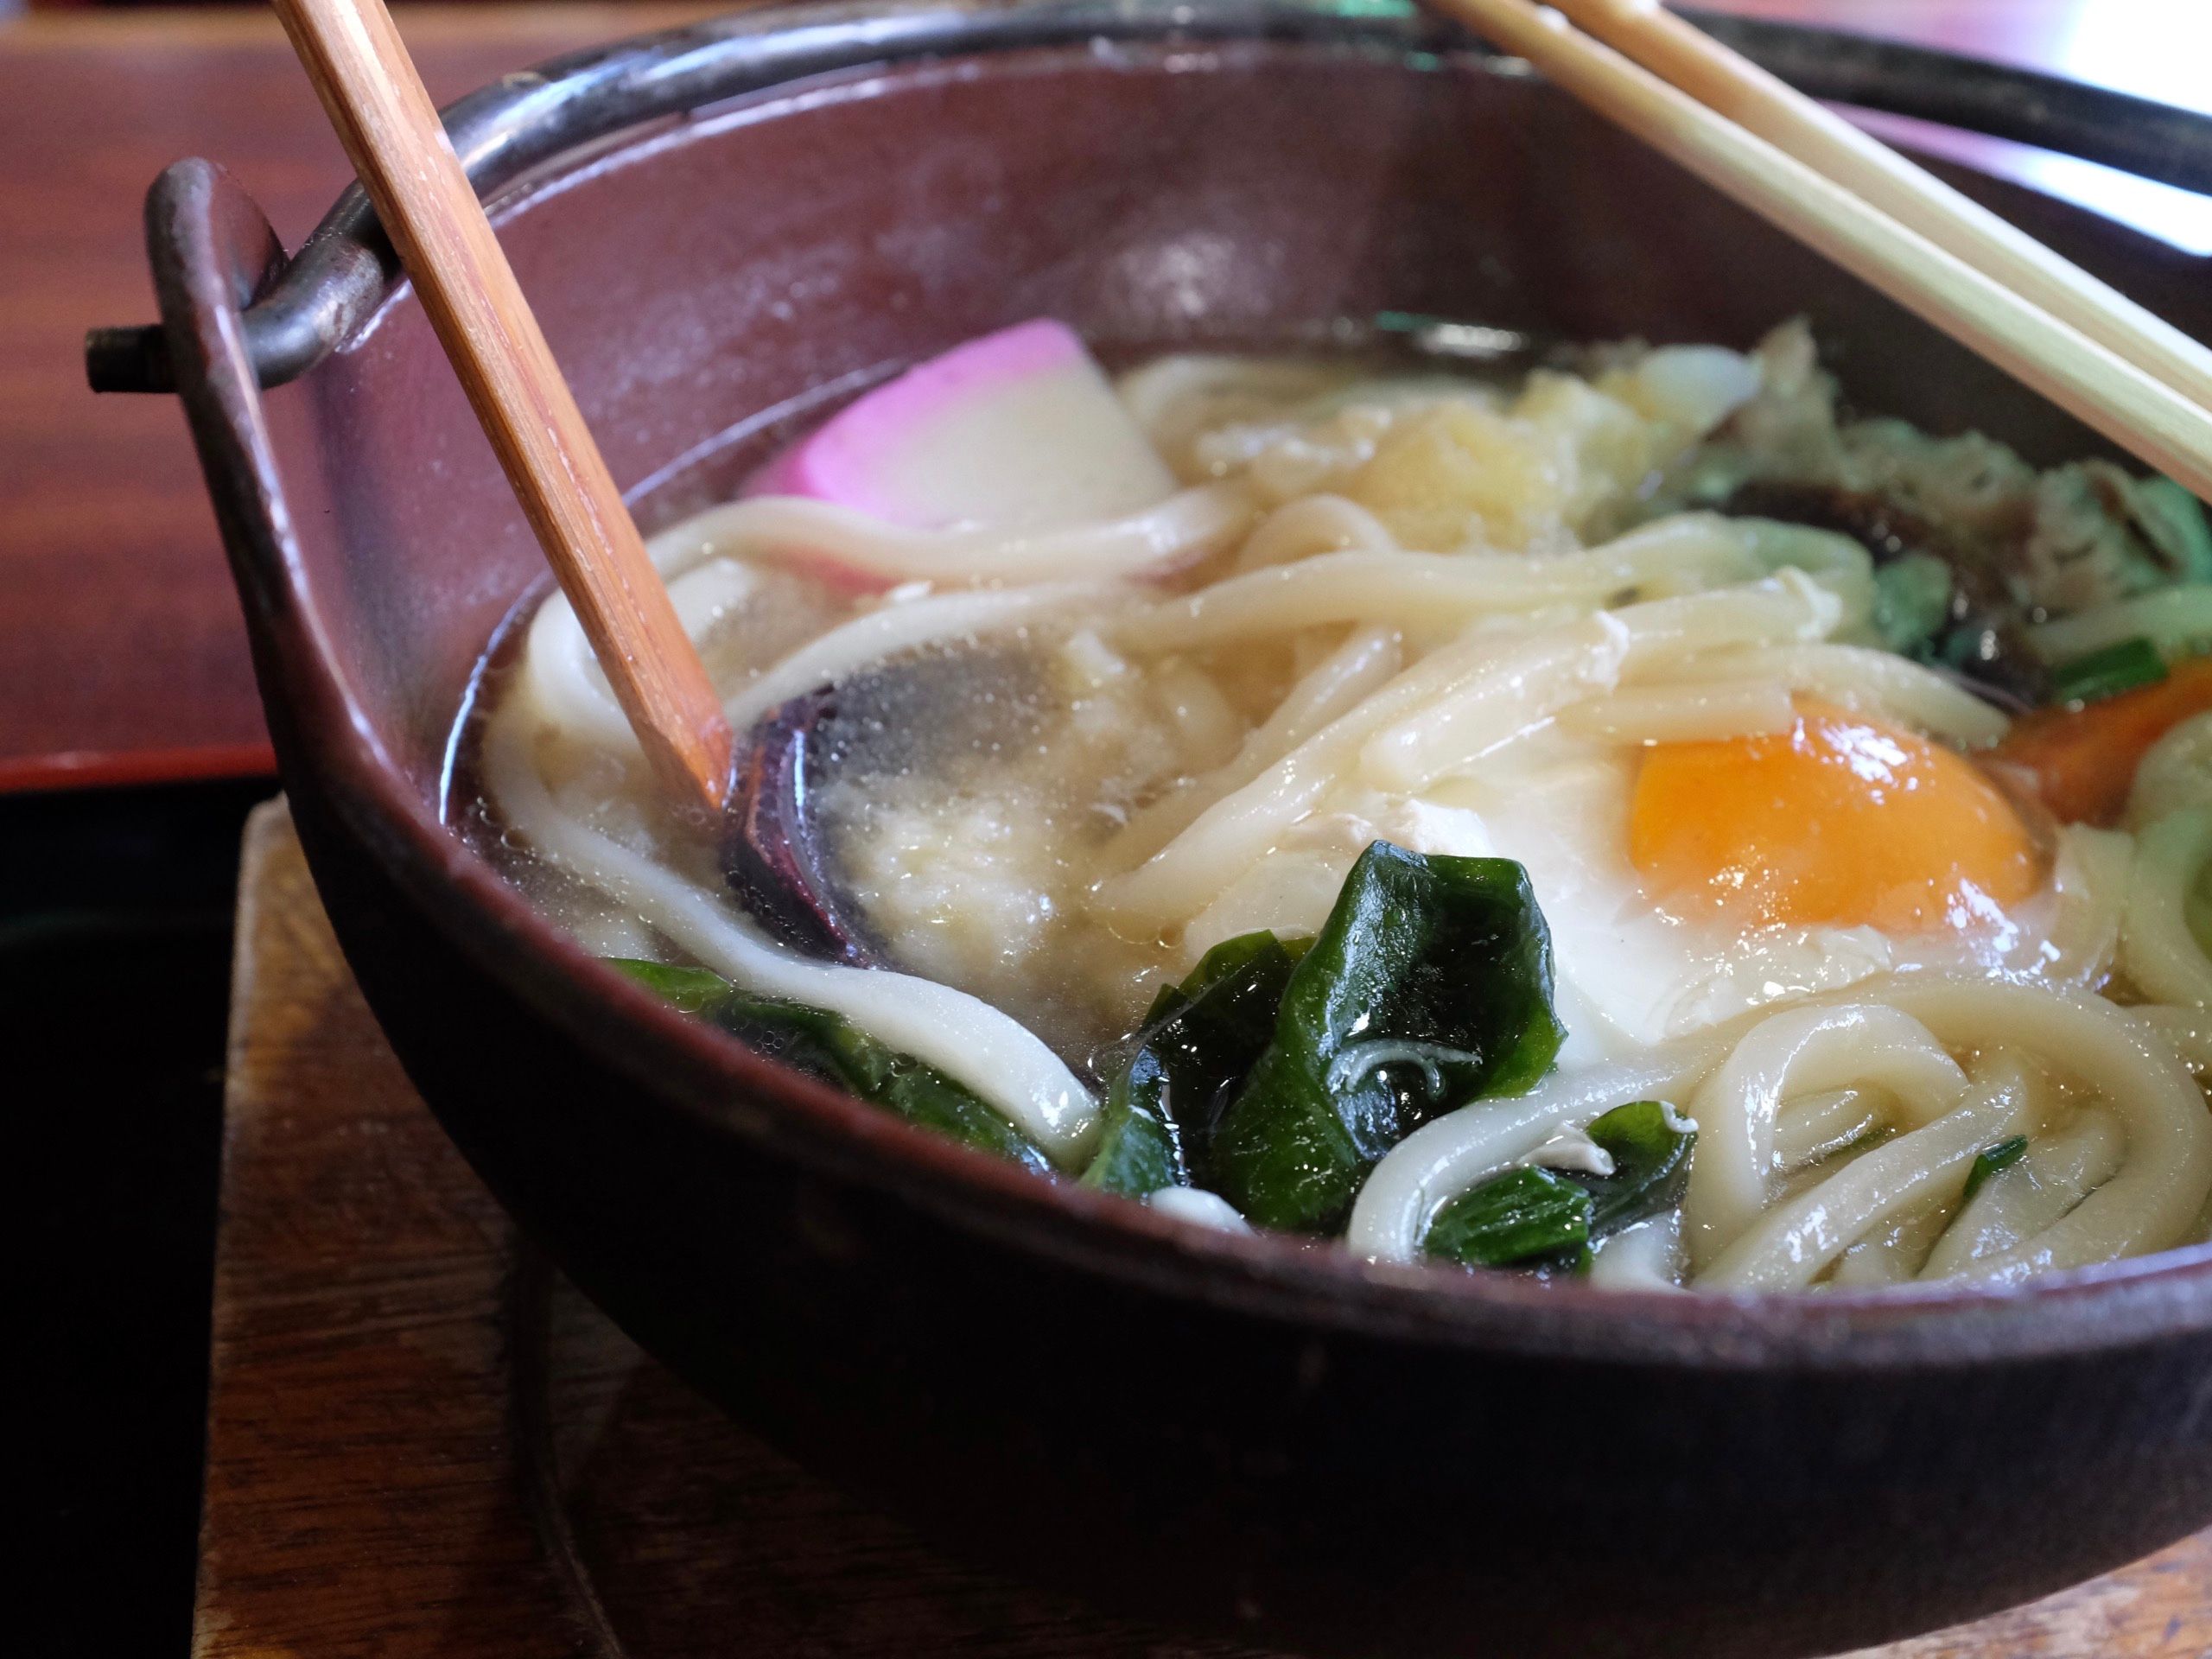 A bowl of noodles with vegetables and an egg.